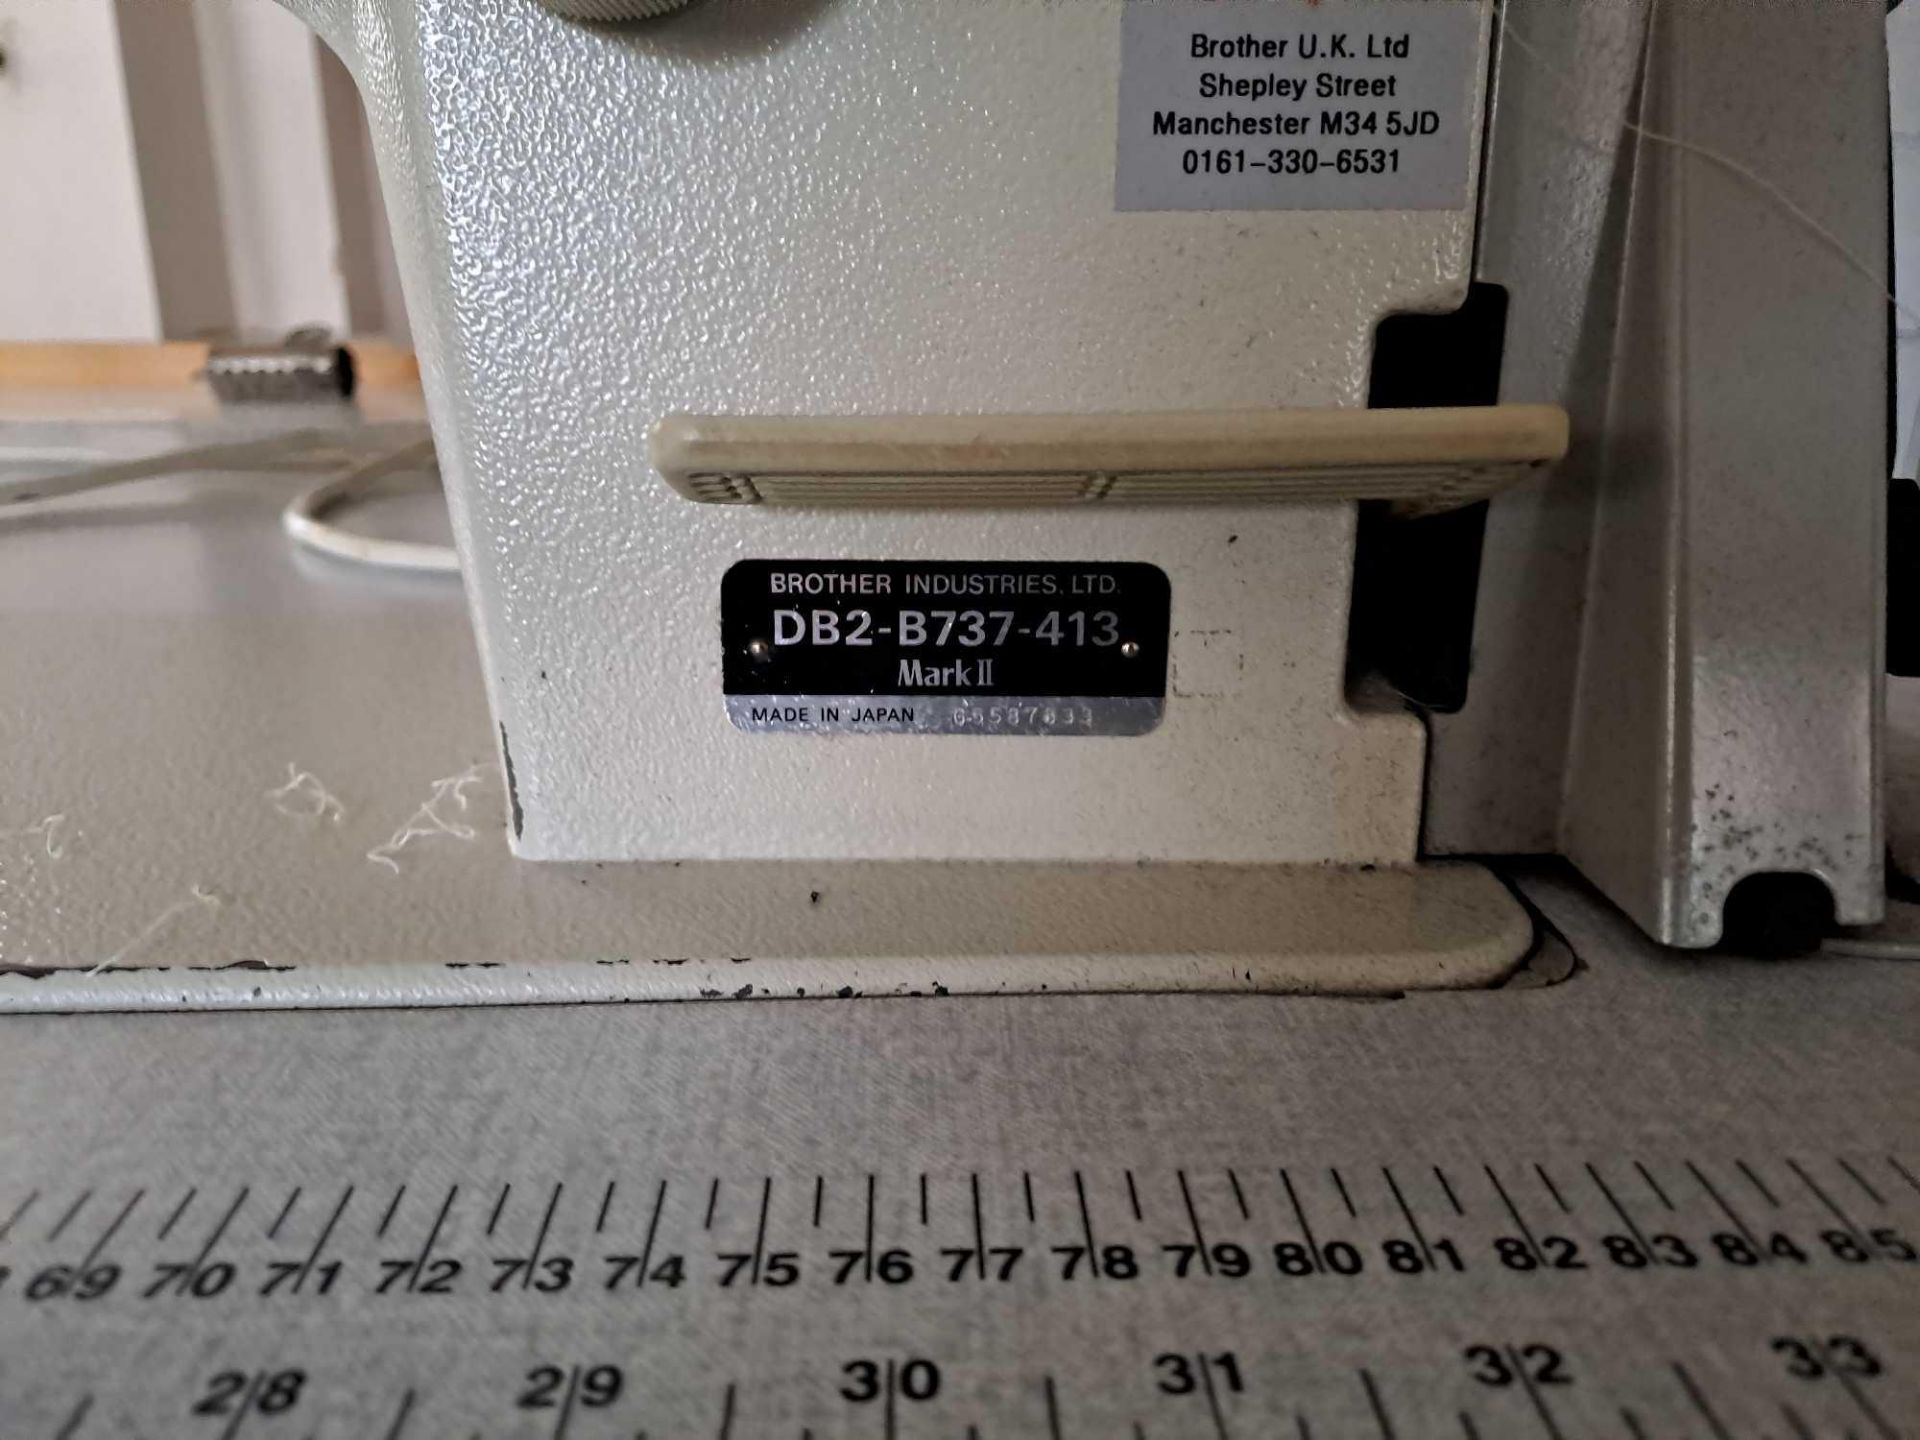 Brother DB2-B737-413 Sewing Machine - Image 3 of 6